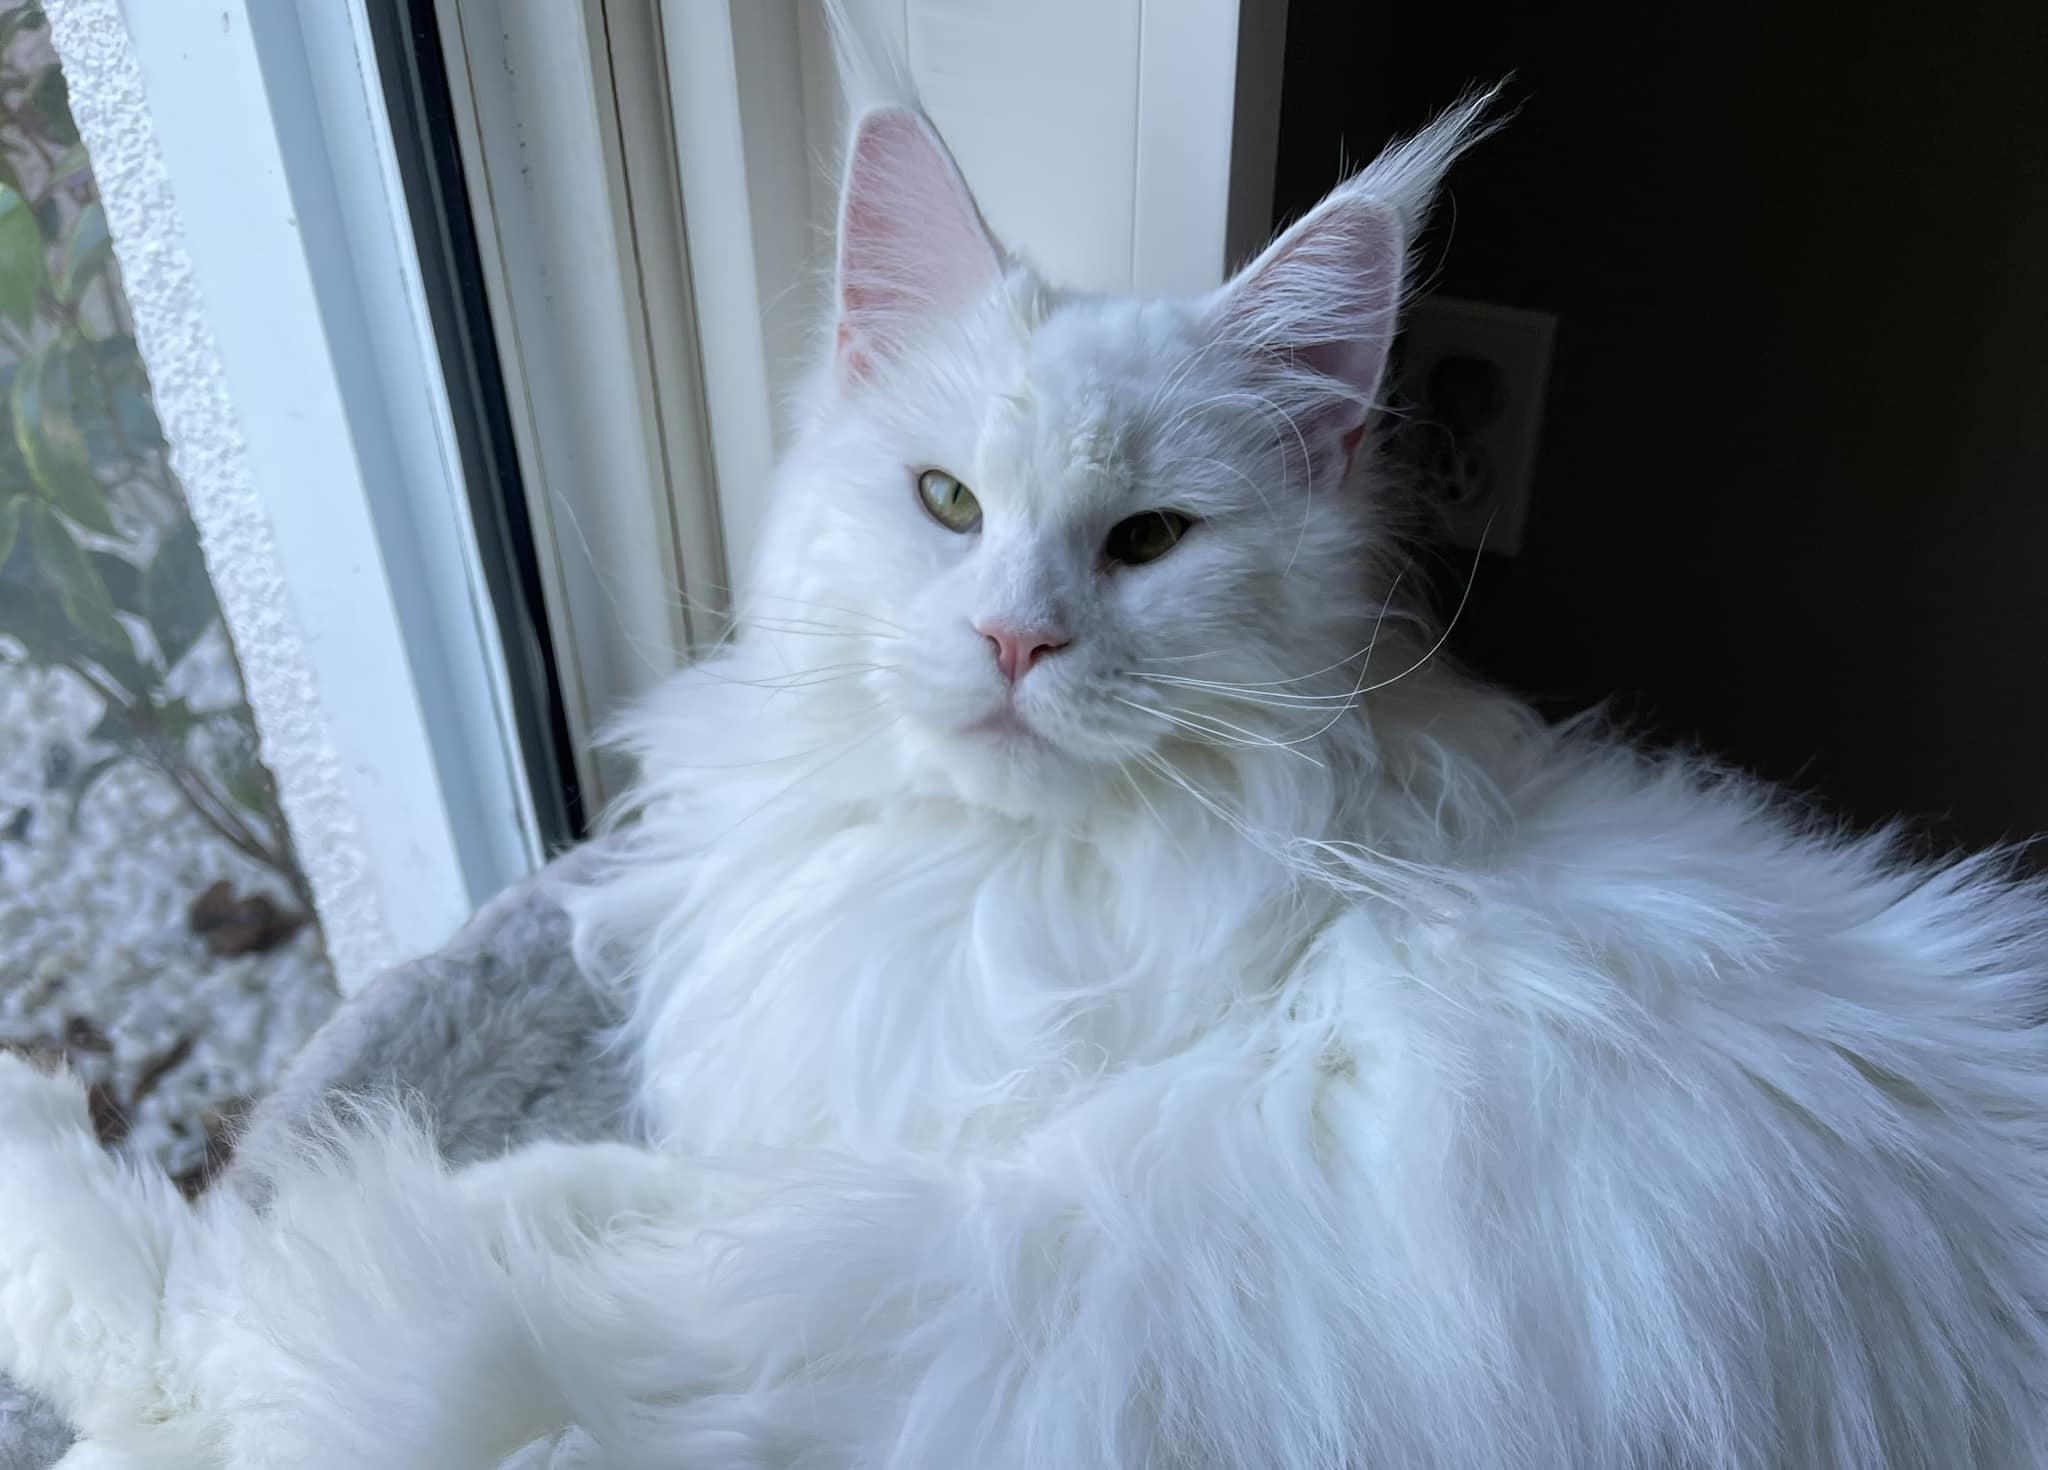 How can I maintain my Maine Coon’s weight and diet?